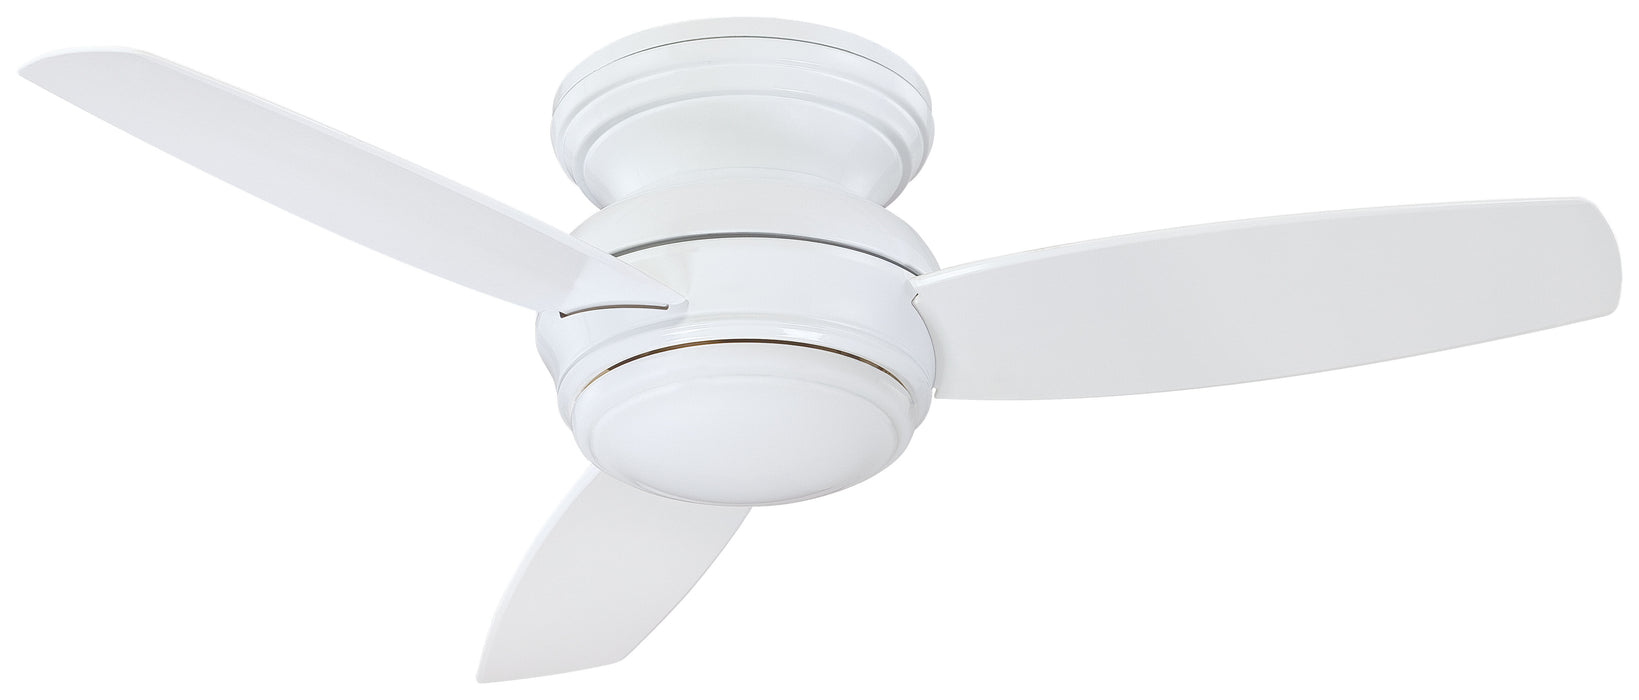 Traditional Concept™ - LED Ceiling Fan